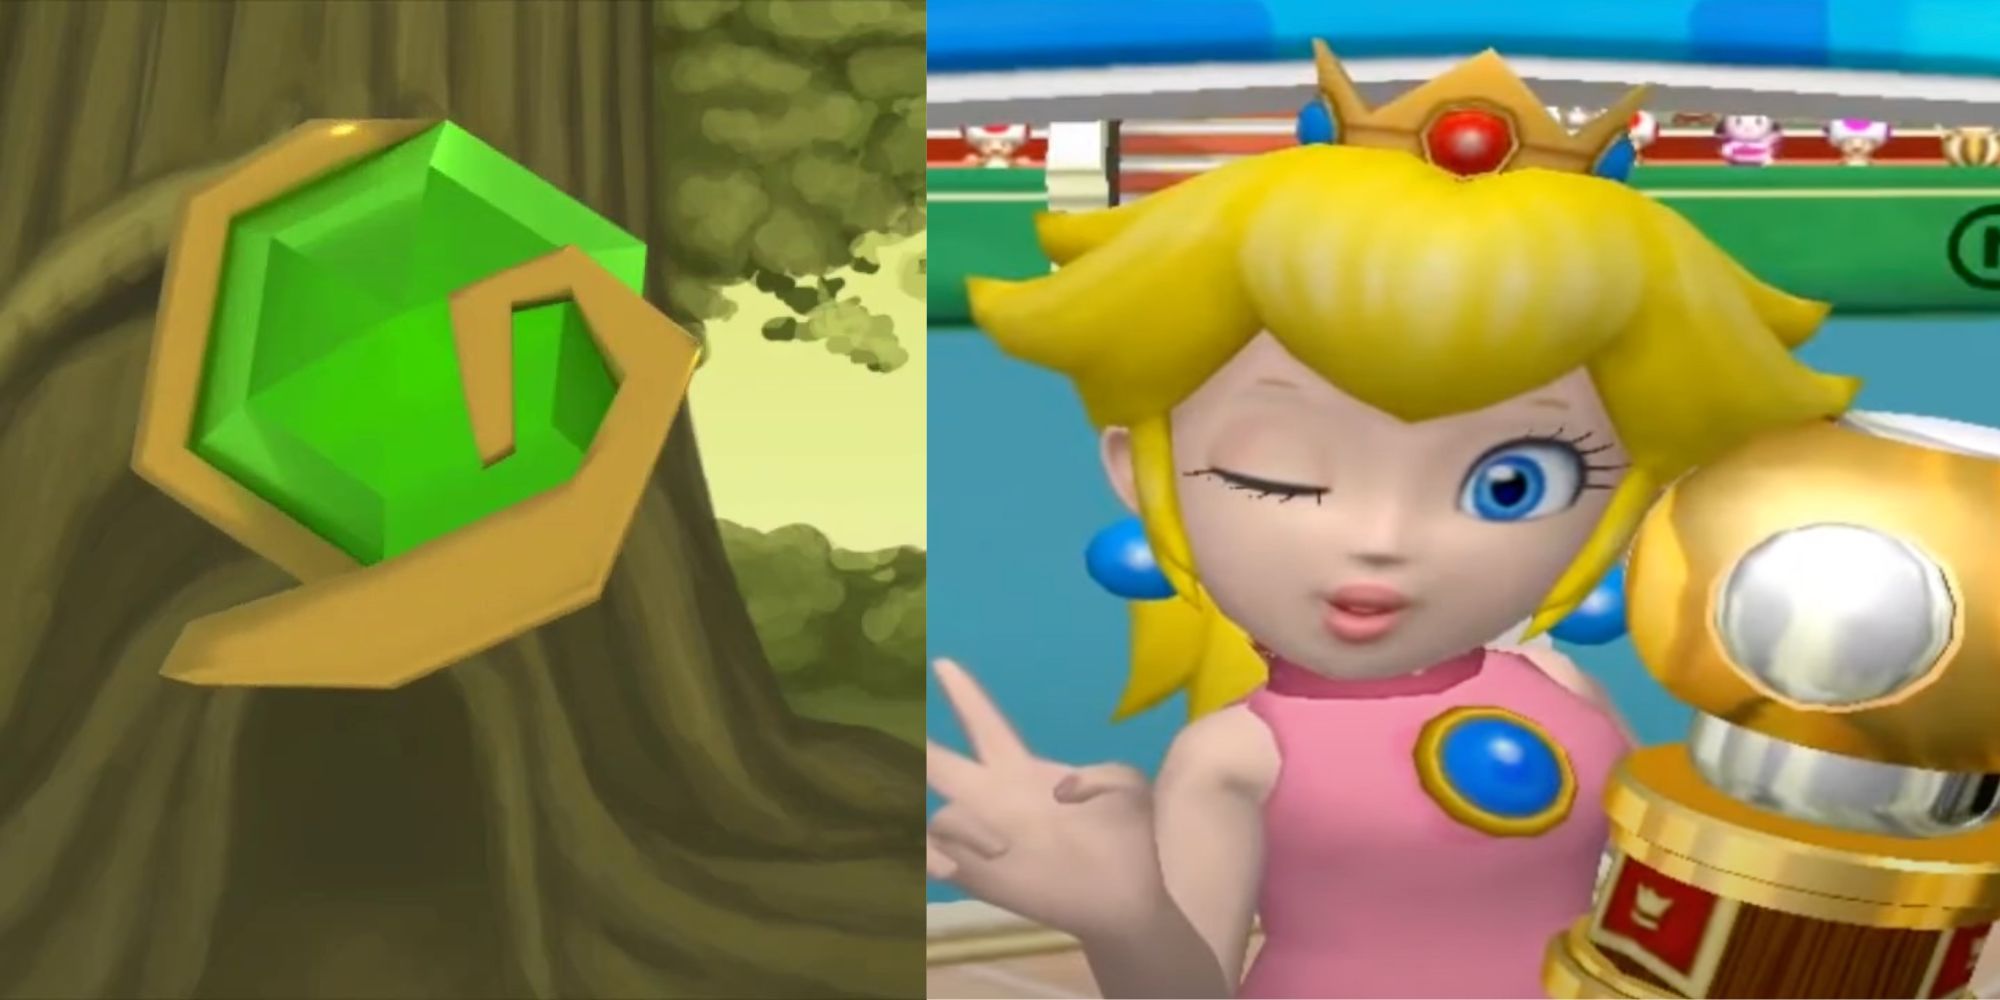 The Kokiri's Emerald From The Legend Of Zelda Ocarina Of Time And Princess Peach Winking From Mario Power Tennis